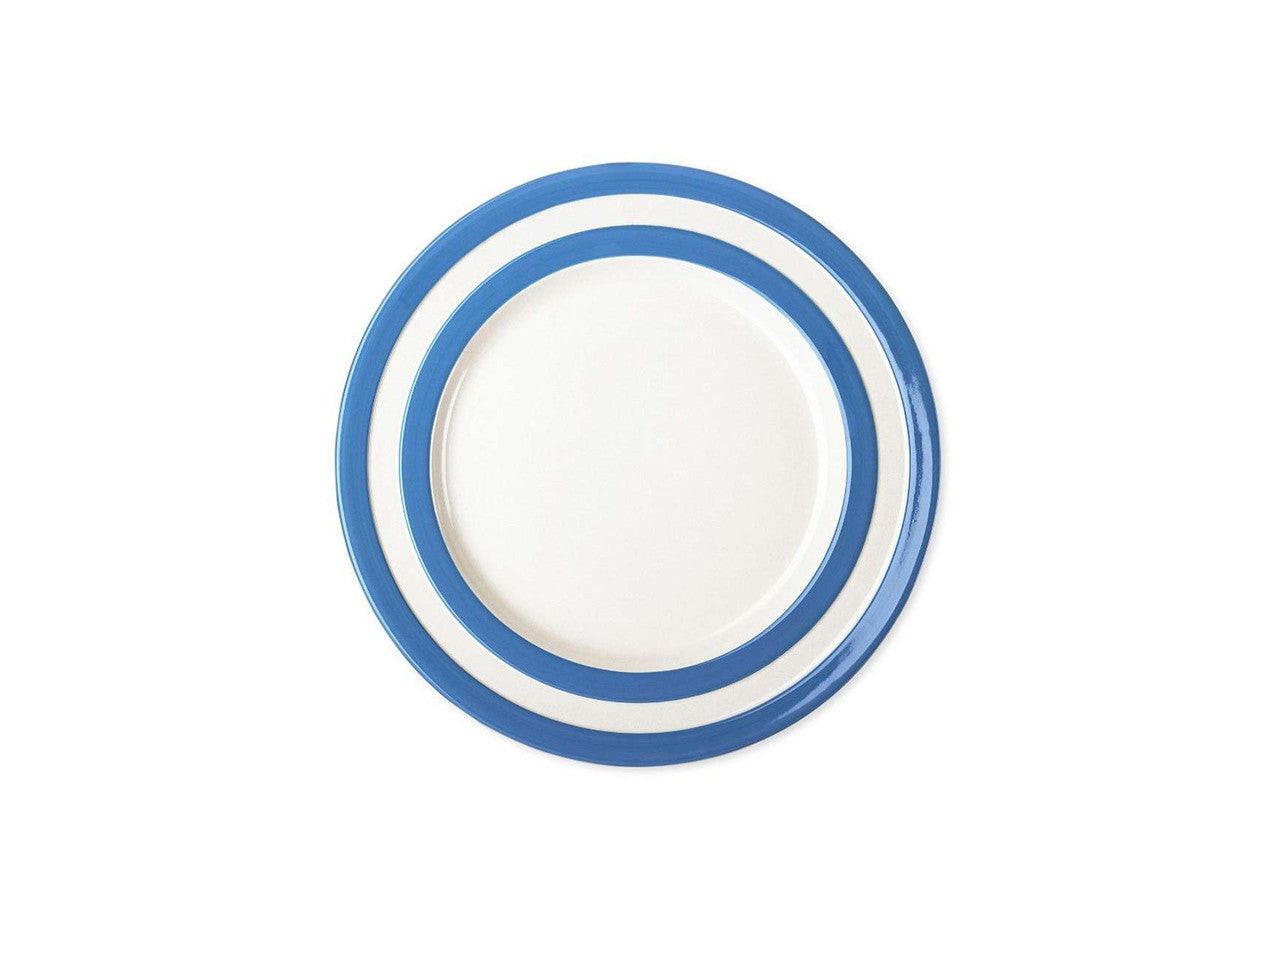 Cornishware 9.5 inch Lunch plate - Blue